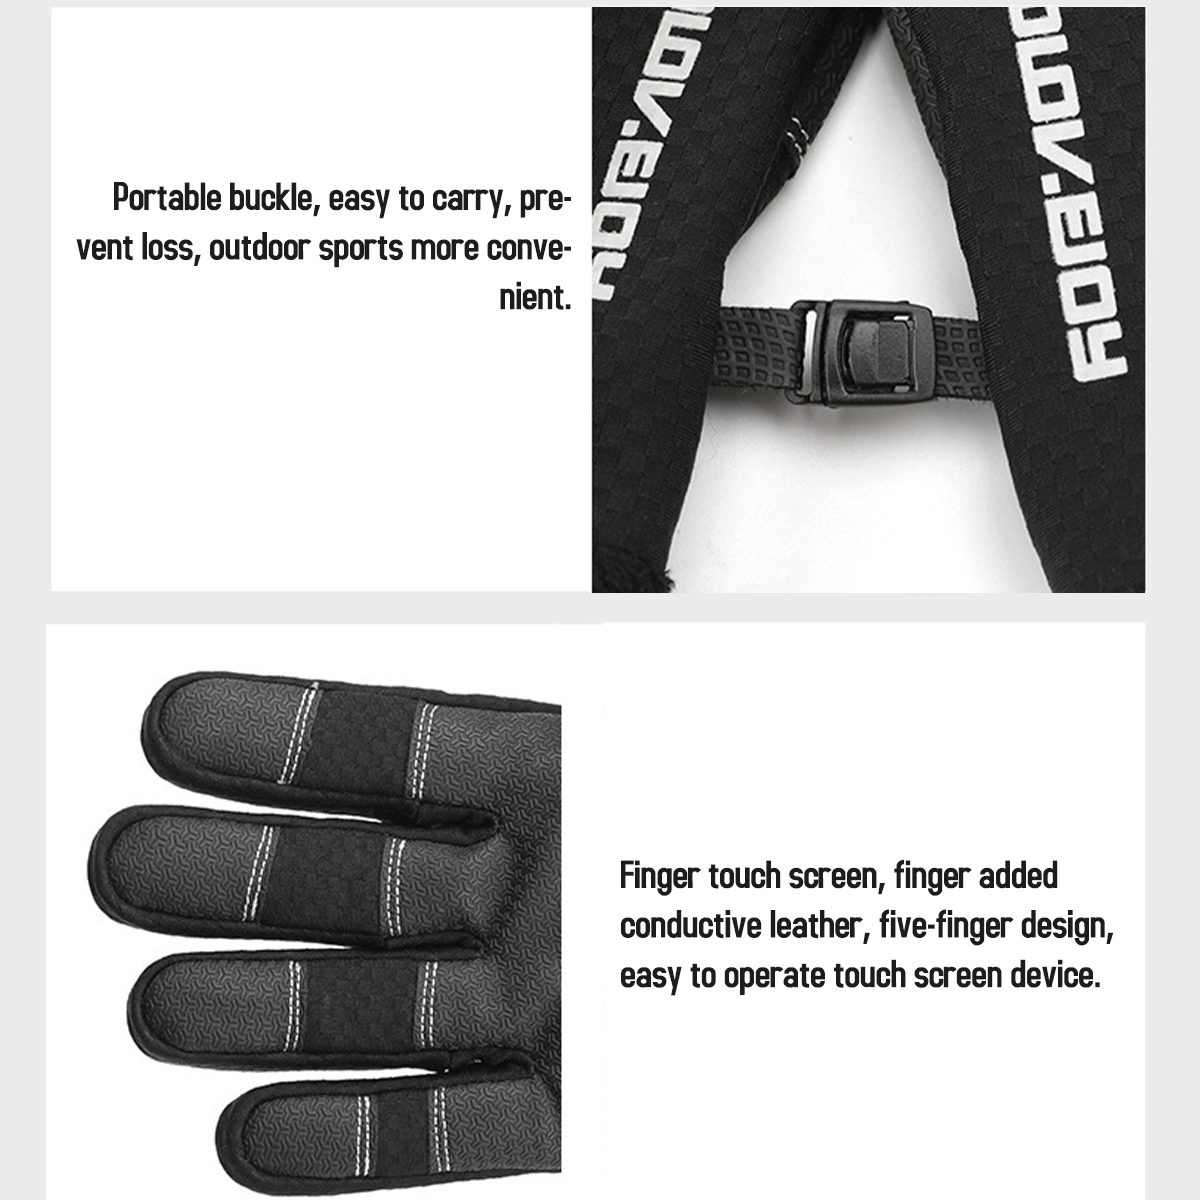 Windstopers-Skiing-Gloves-Anti-Slip-Touchscreen-Breathable-Water-Repellent-Zipper-Warm-Glove-1580293-5